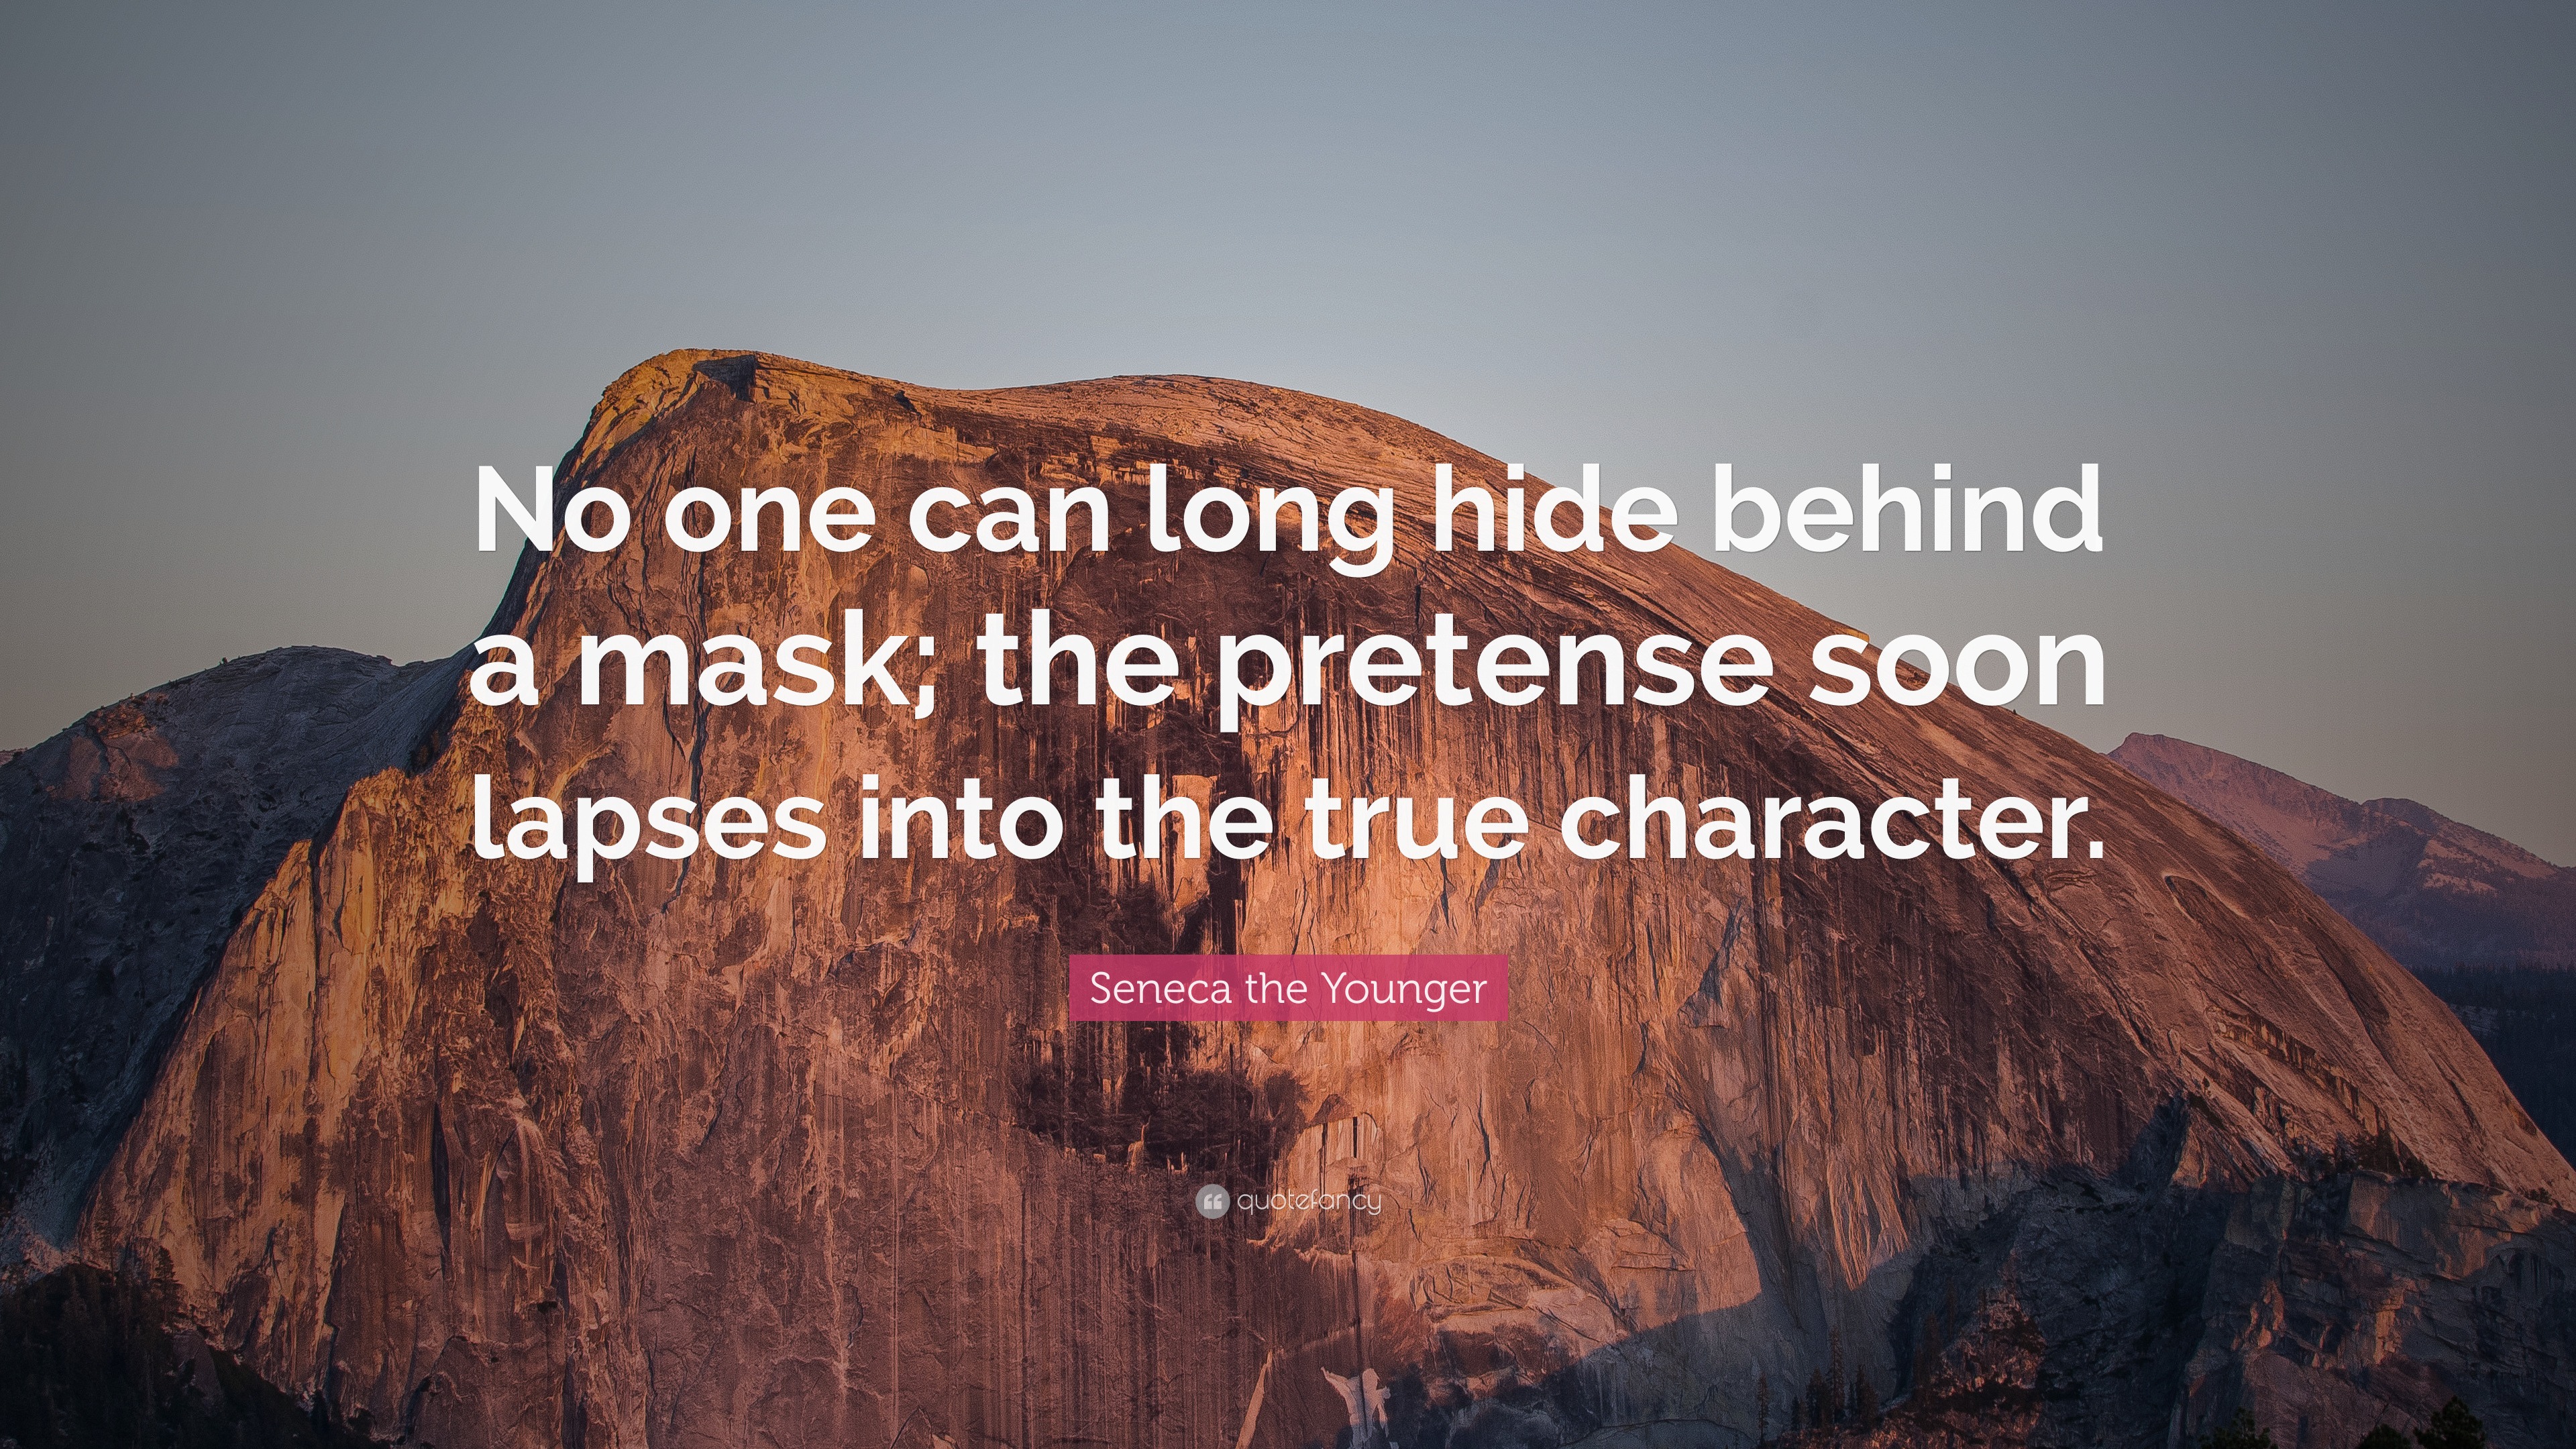 Seneca the Younger Quote: “No one can long hide behind a mask; the